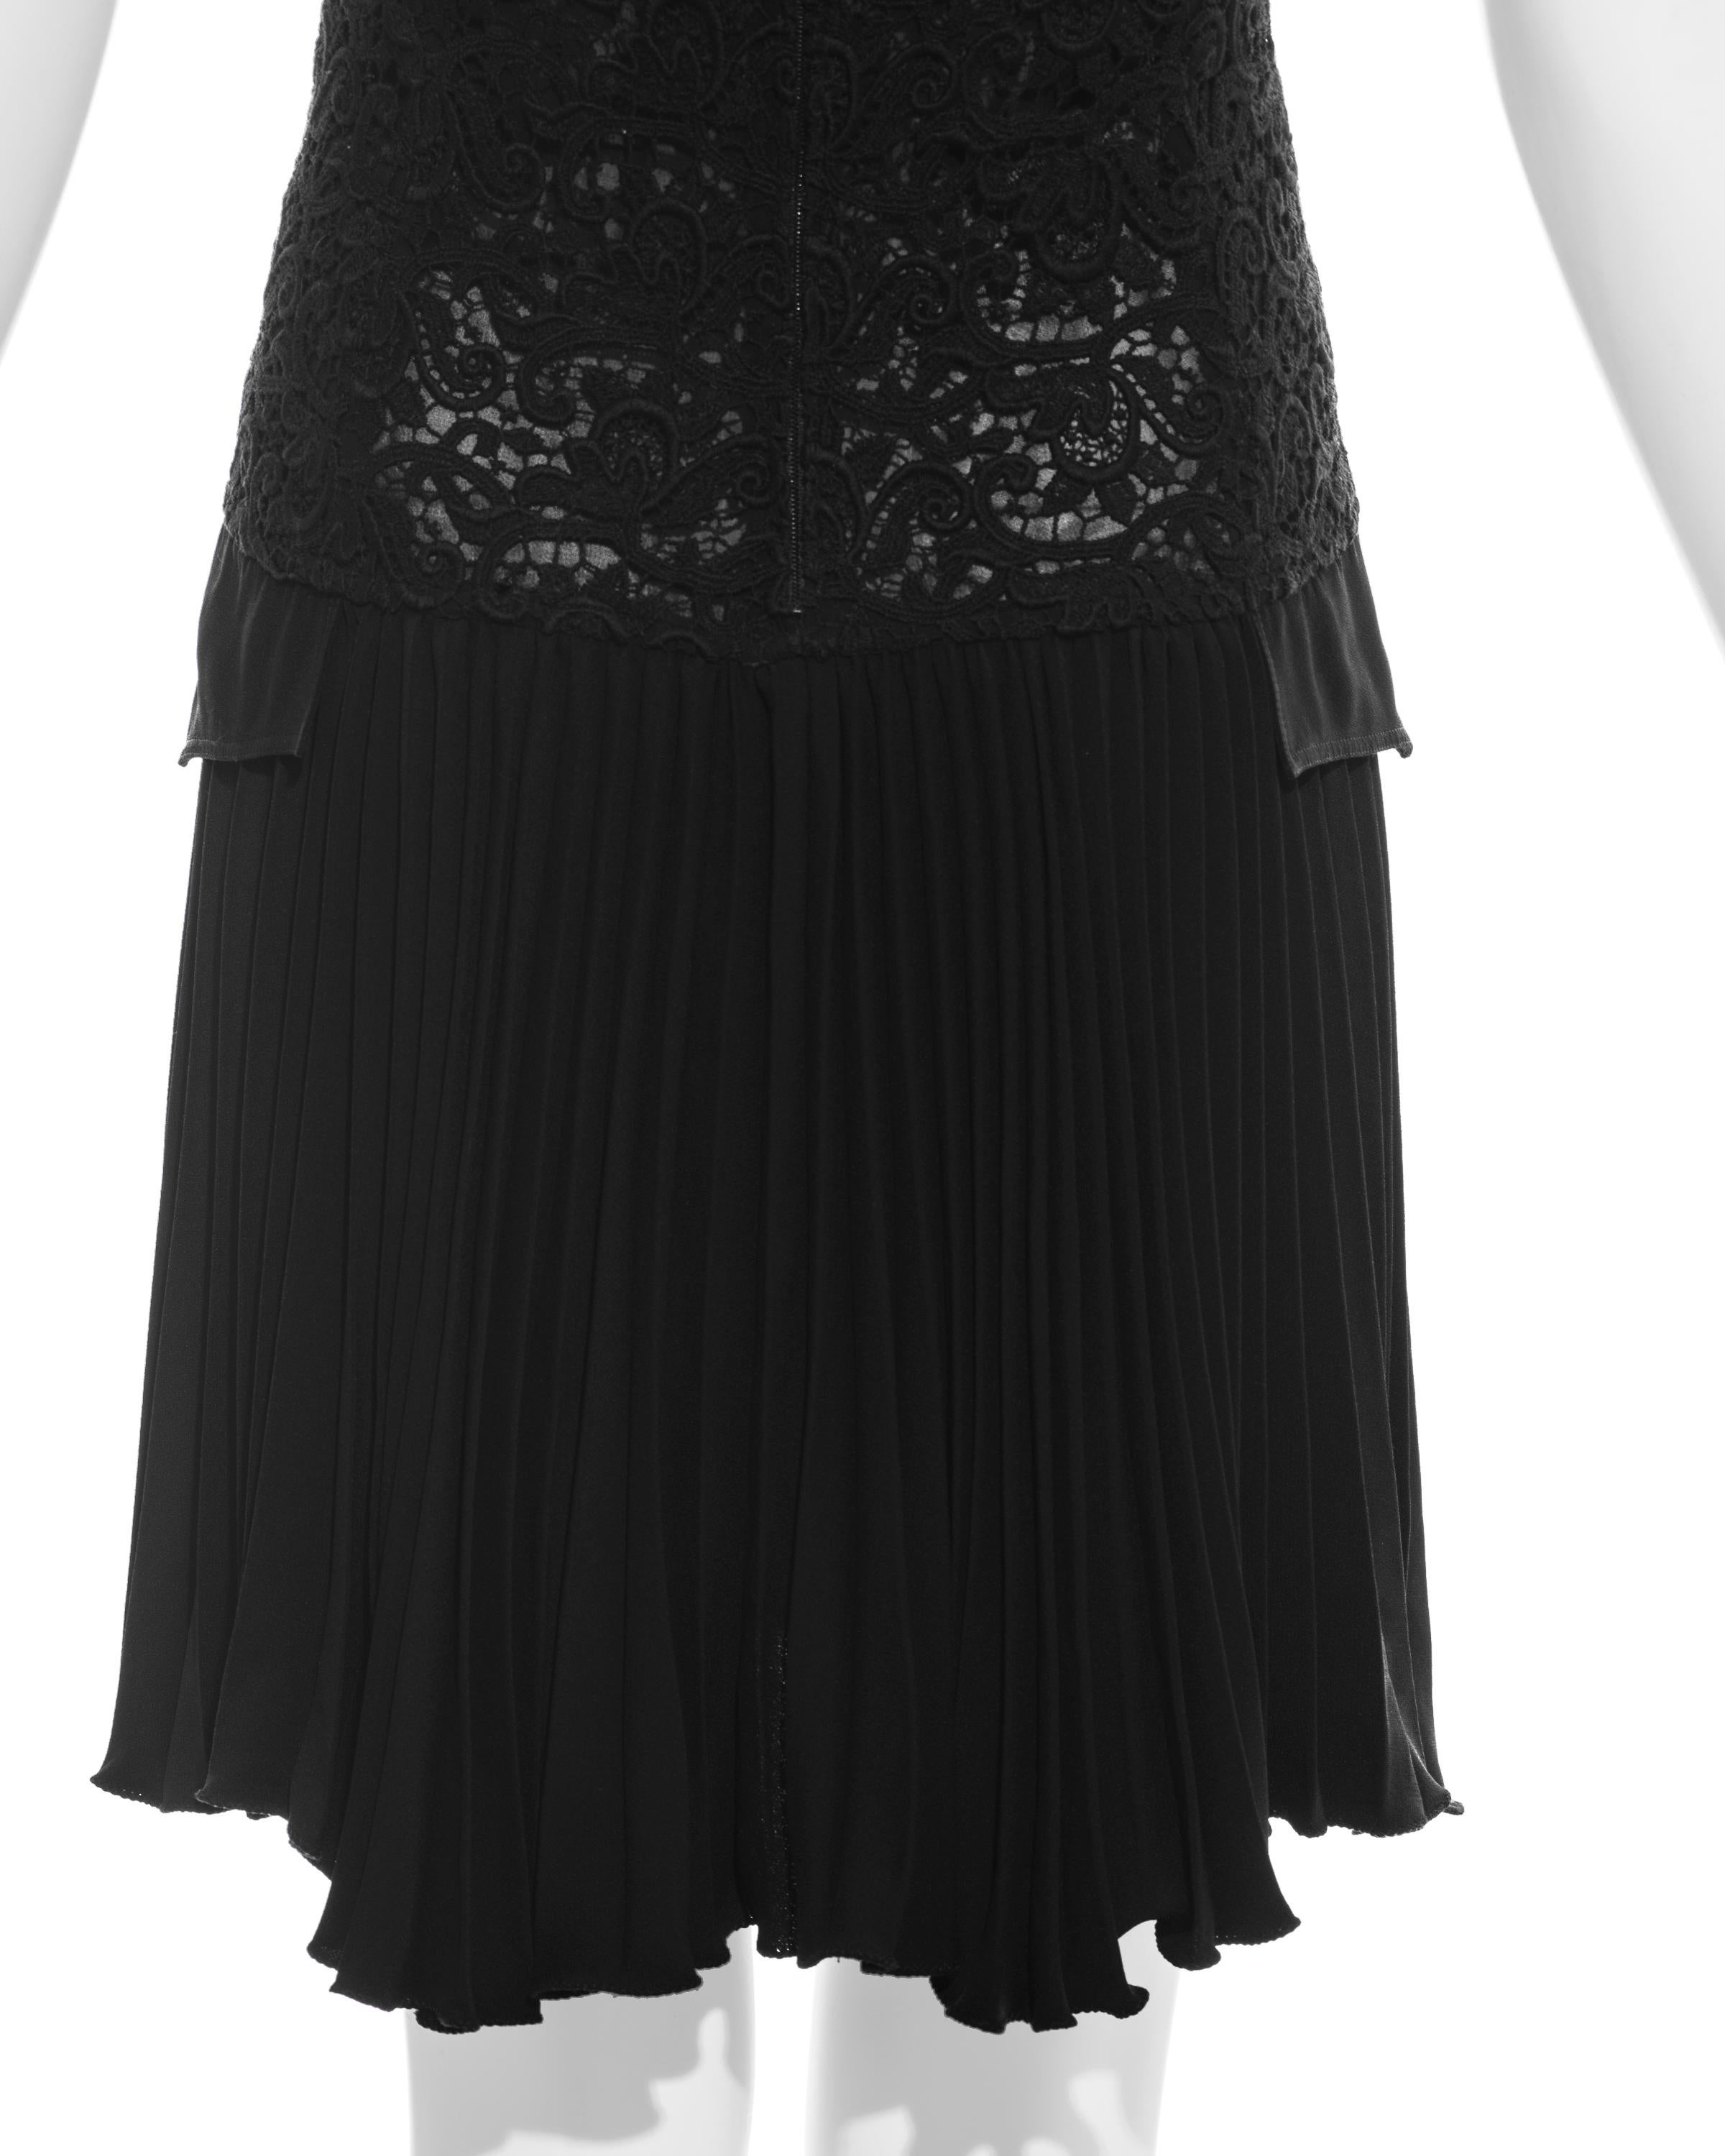 Gianni Versace black pleated and lace evening dress, ss 1994 For Sale 1